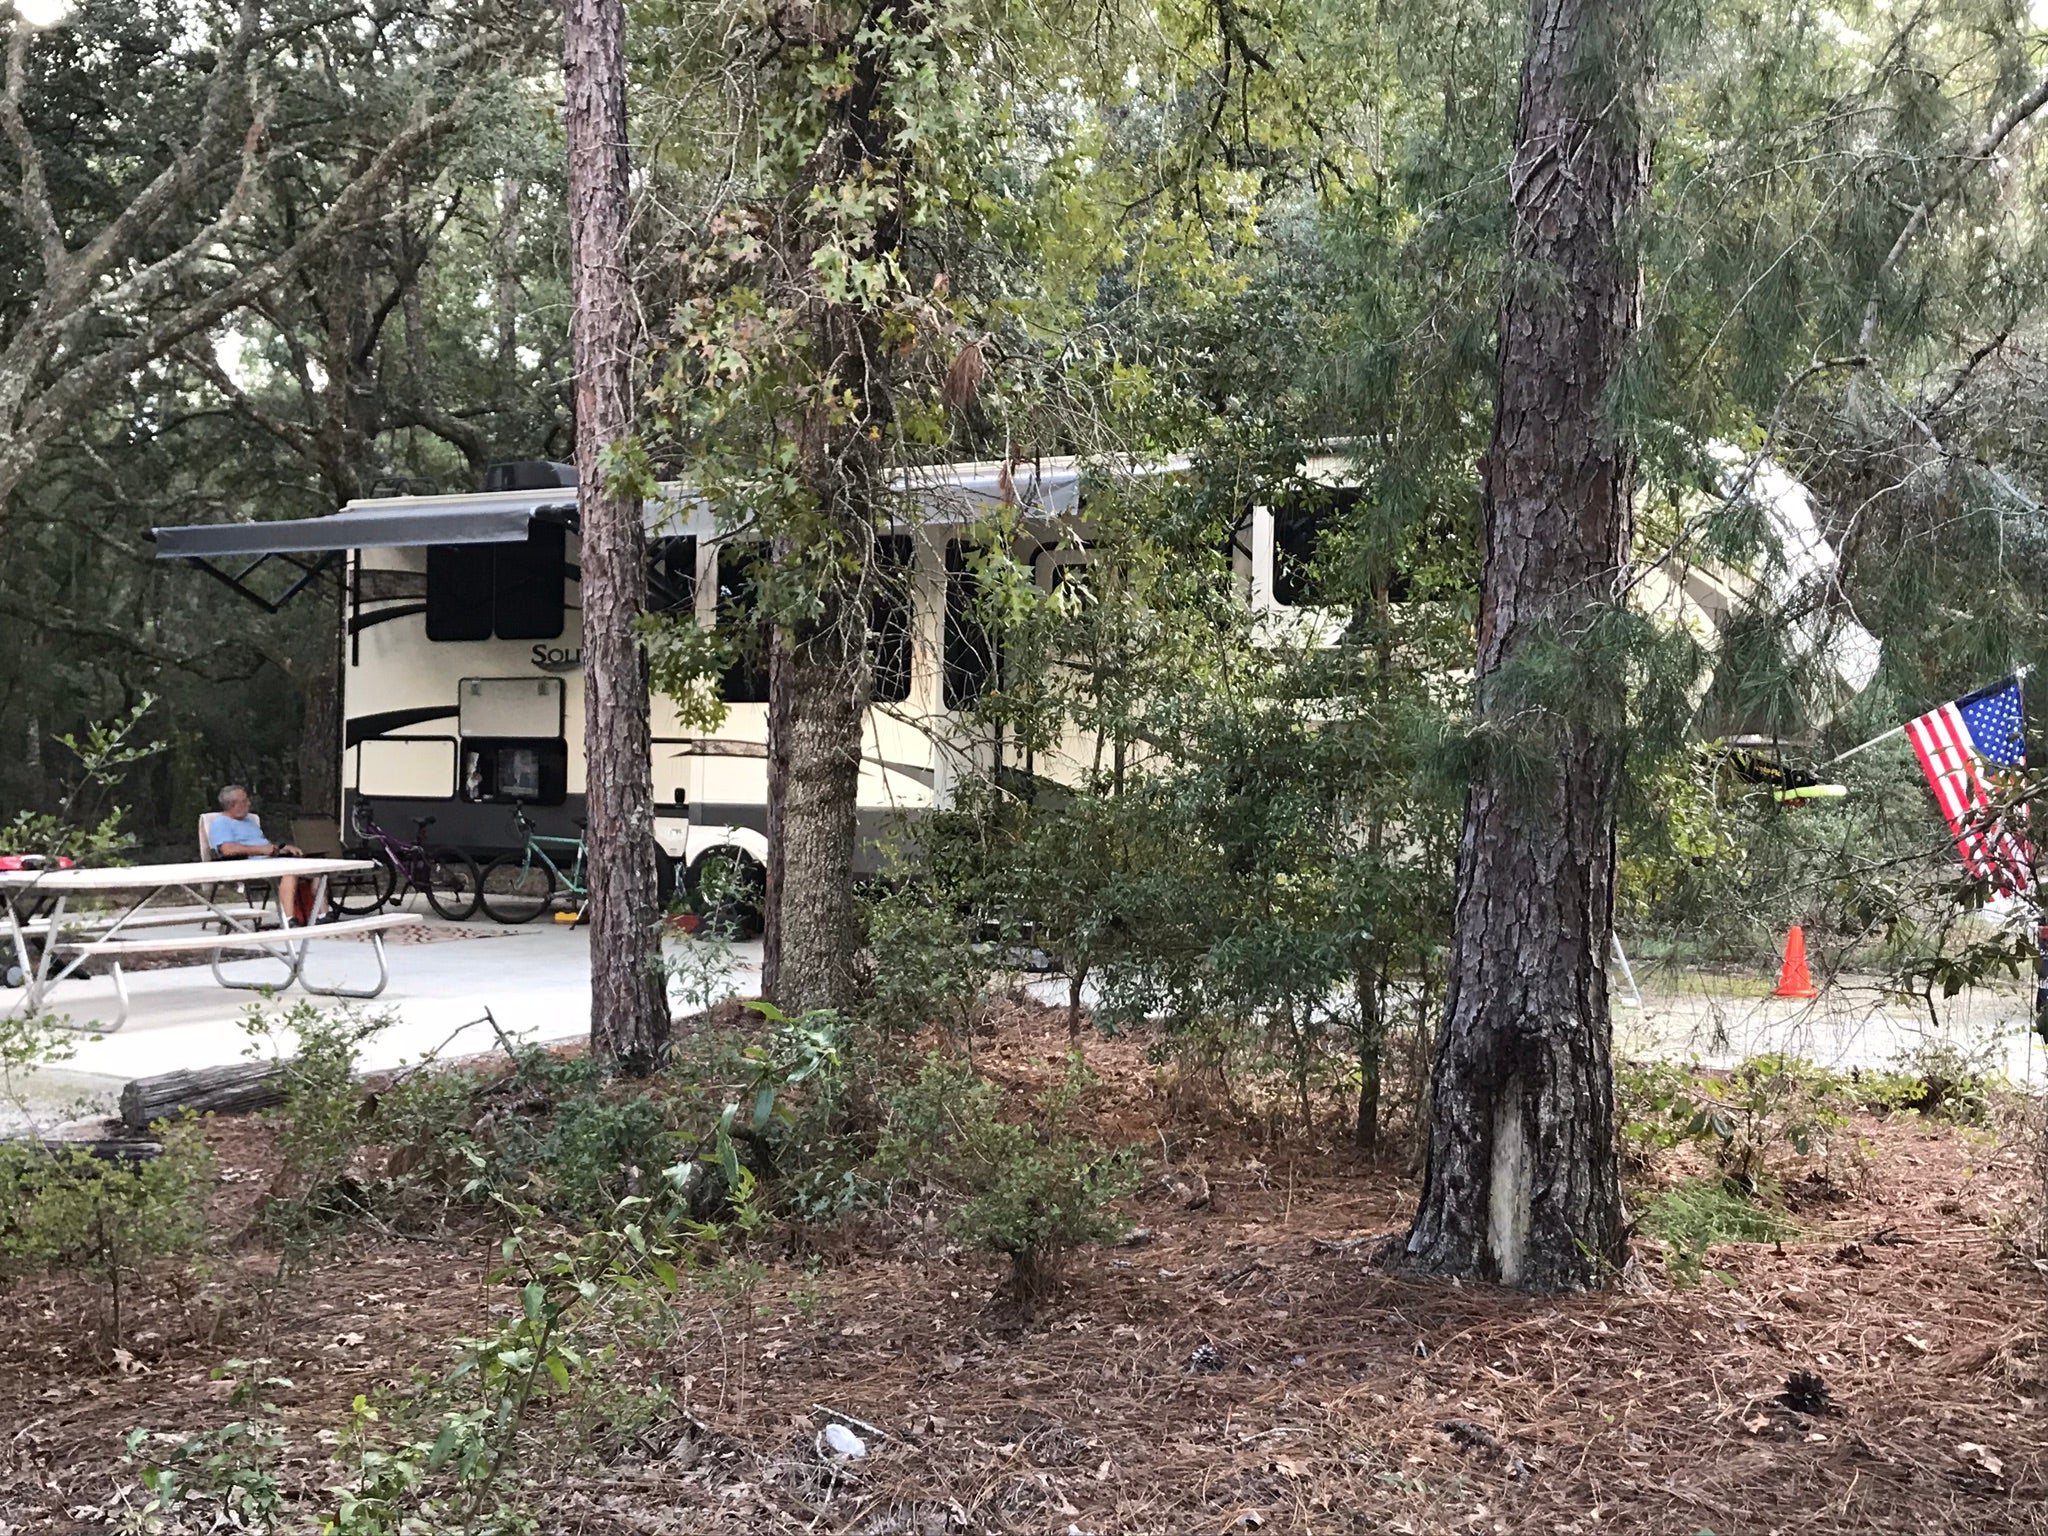 Camper submitted image from Ordway-Swisher Biological Station - 1